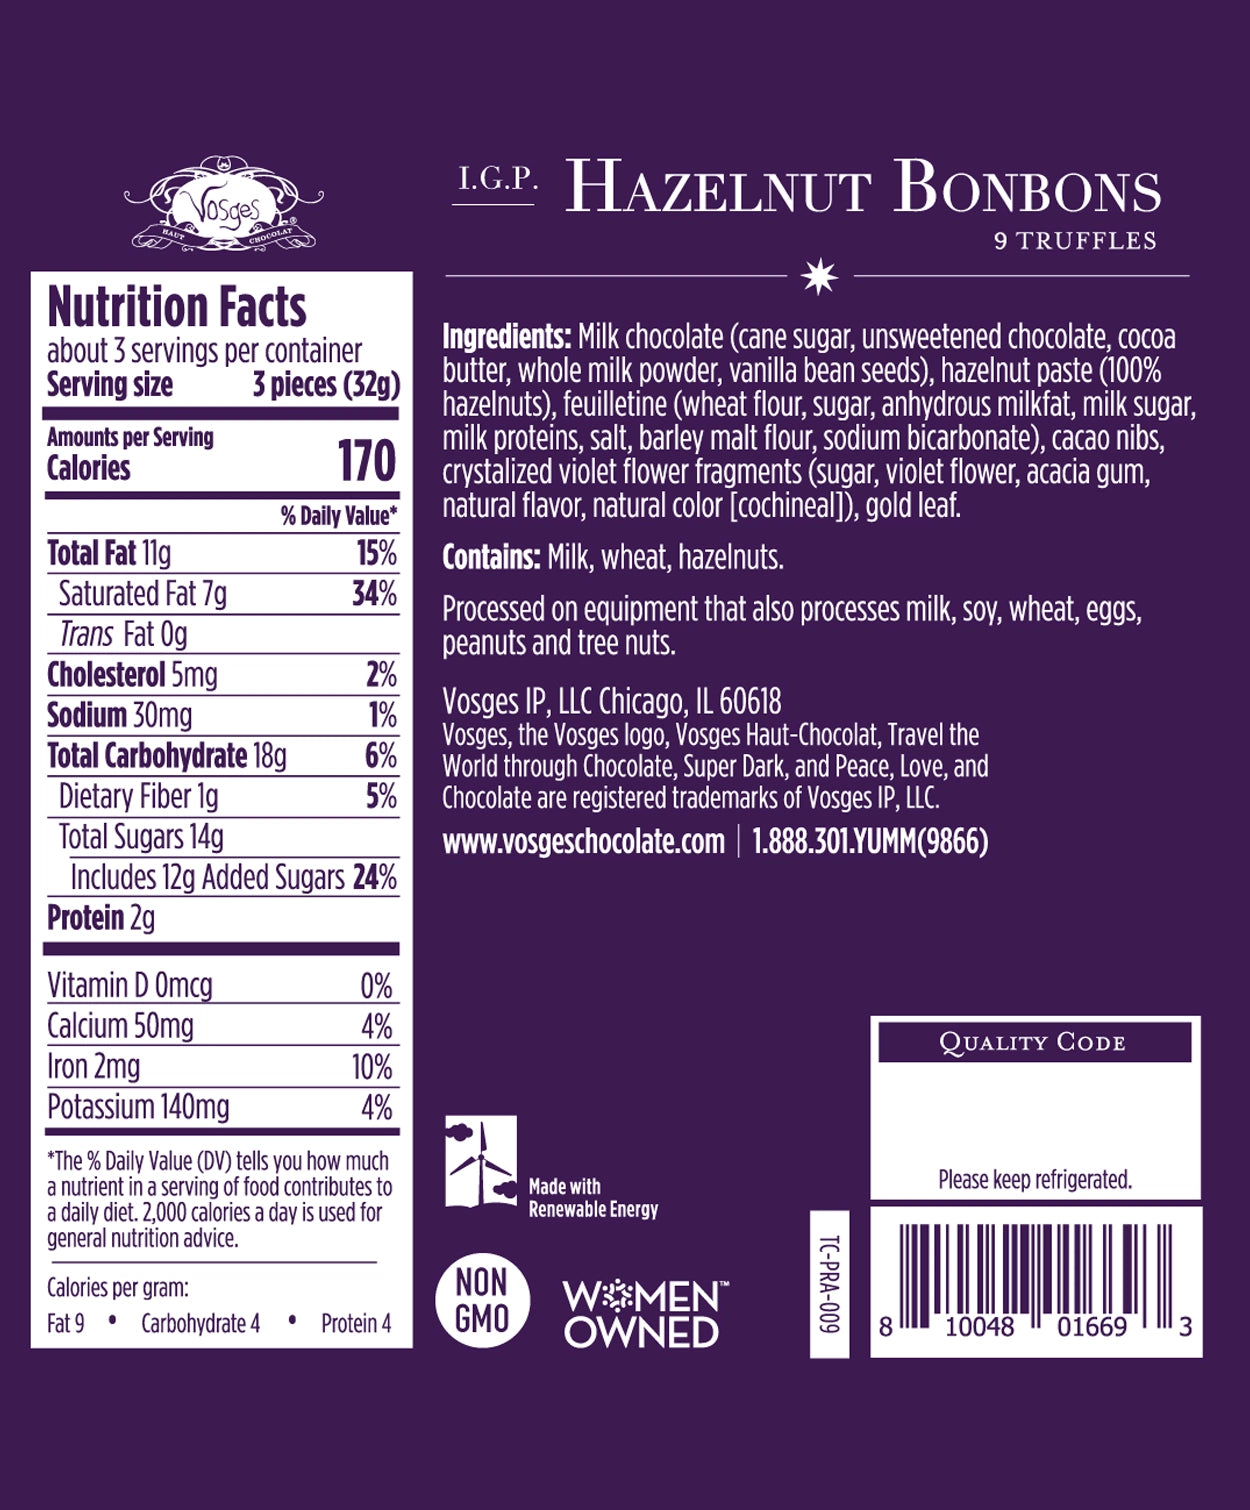 Nutrition Facts and Ingredients of Vosges Haut-Chocolat nine piece hazelnut praline bonbons Truffle Collection printed in white san-serif font on a dark purple background.